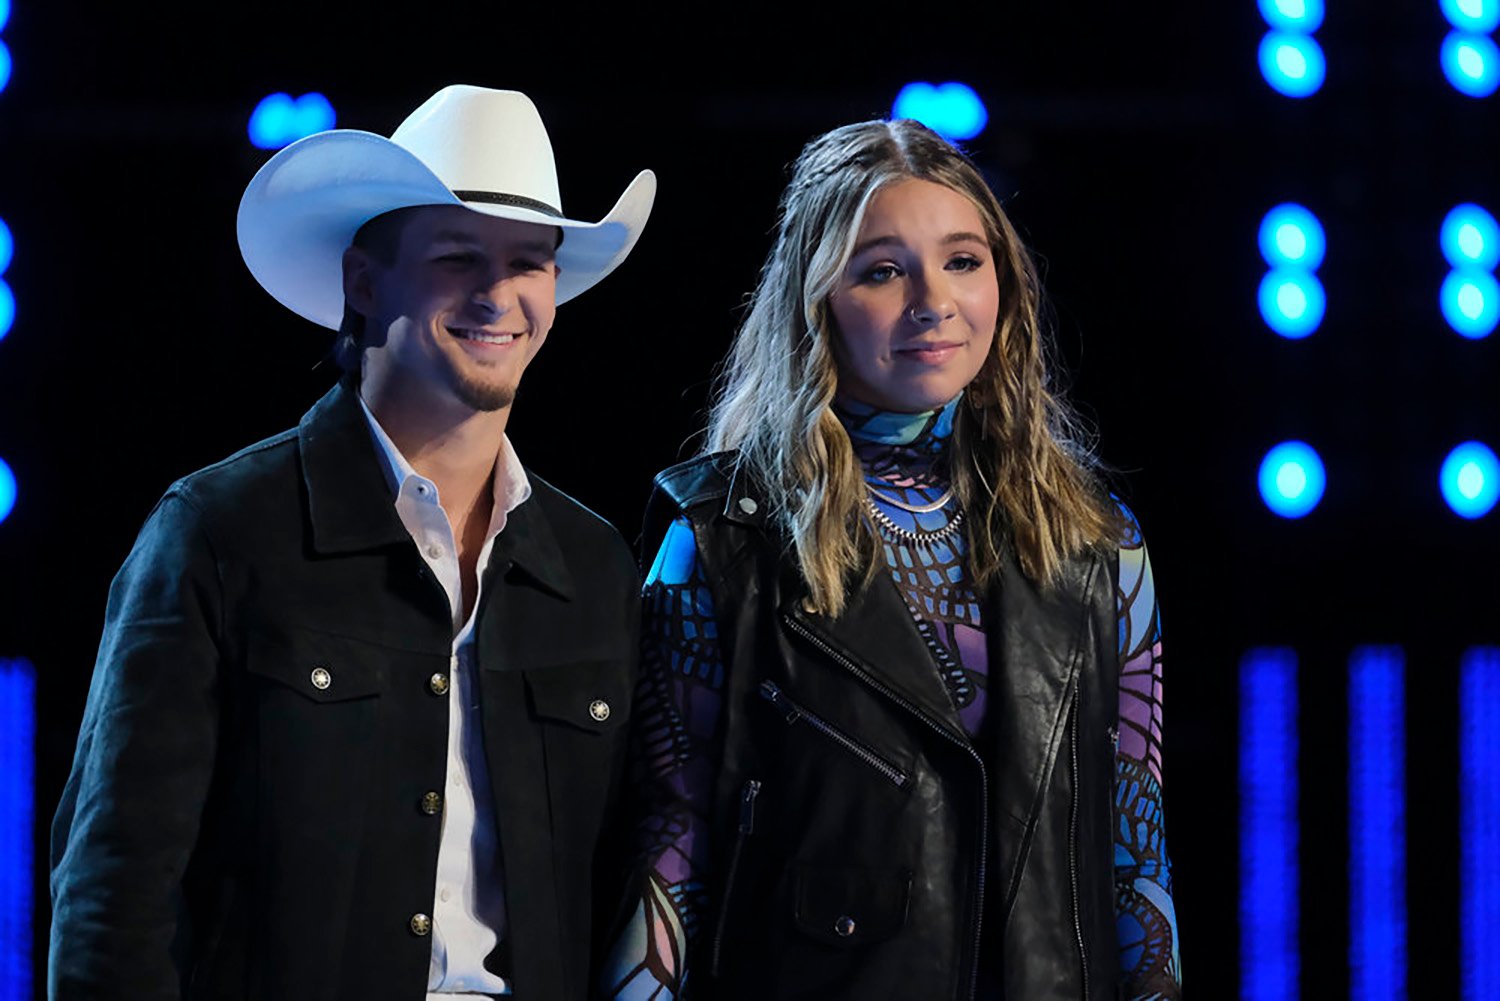 Bryce Leatherwood and Rowan Grace await results on The Voice Season 22 Episode 17.